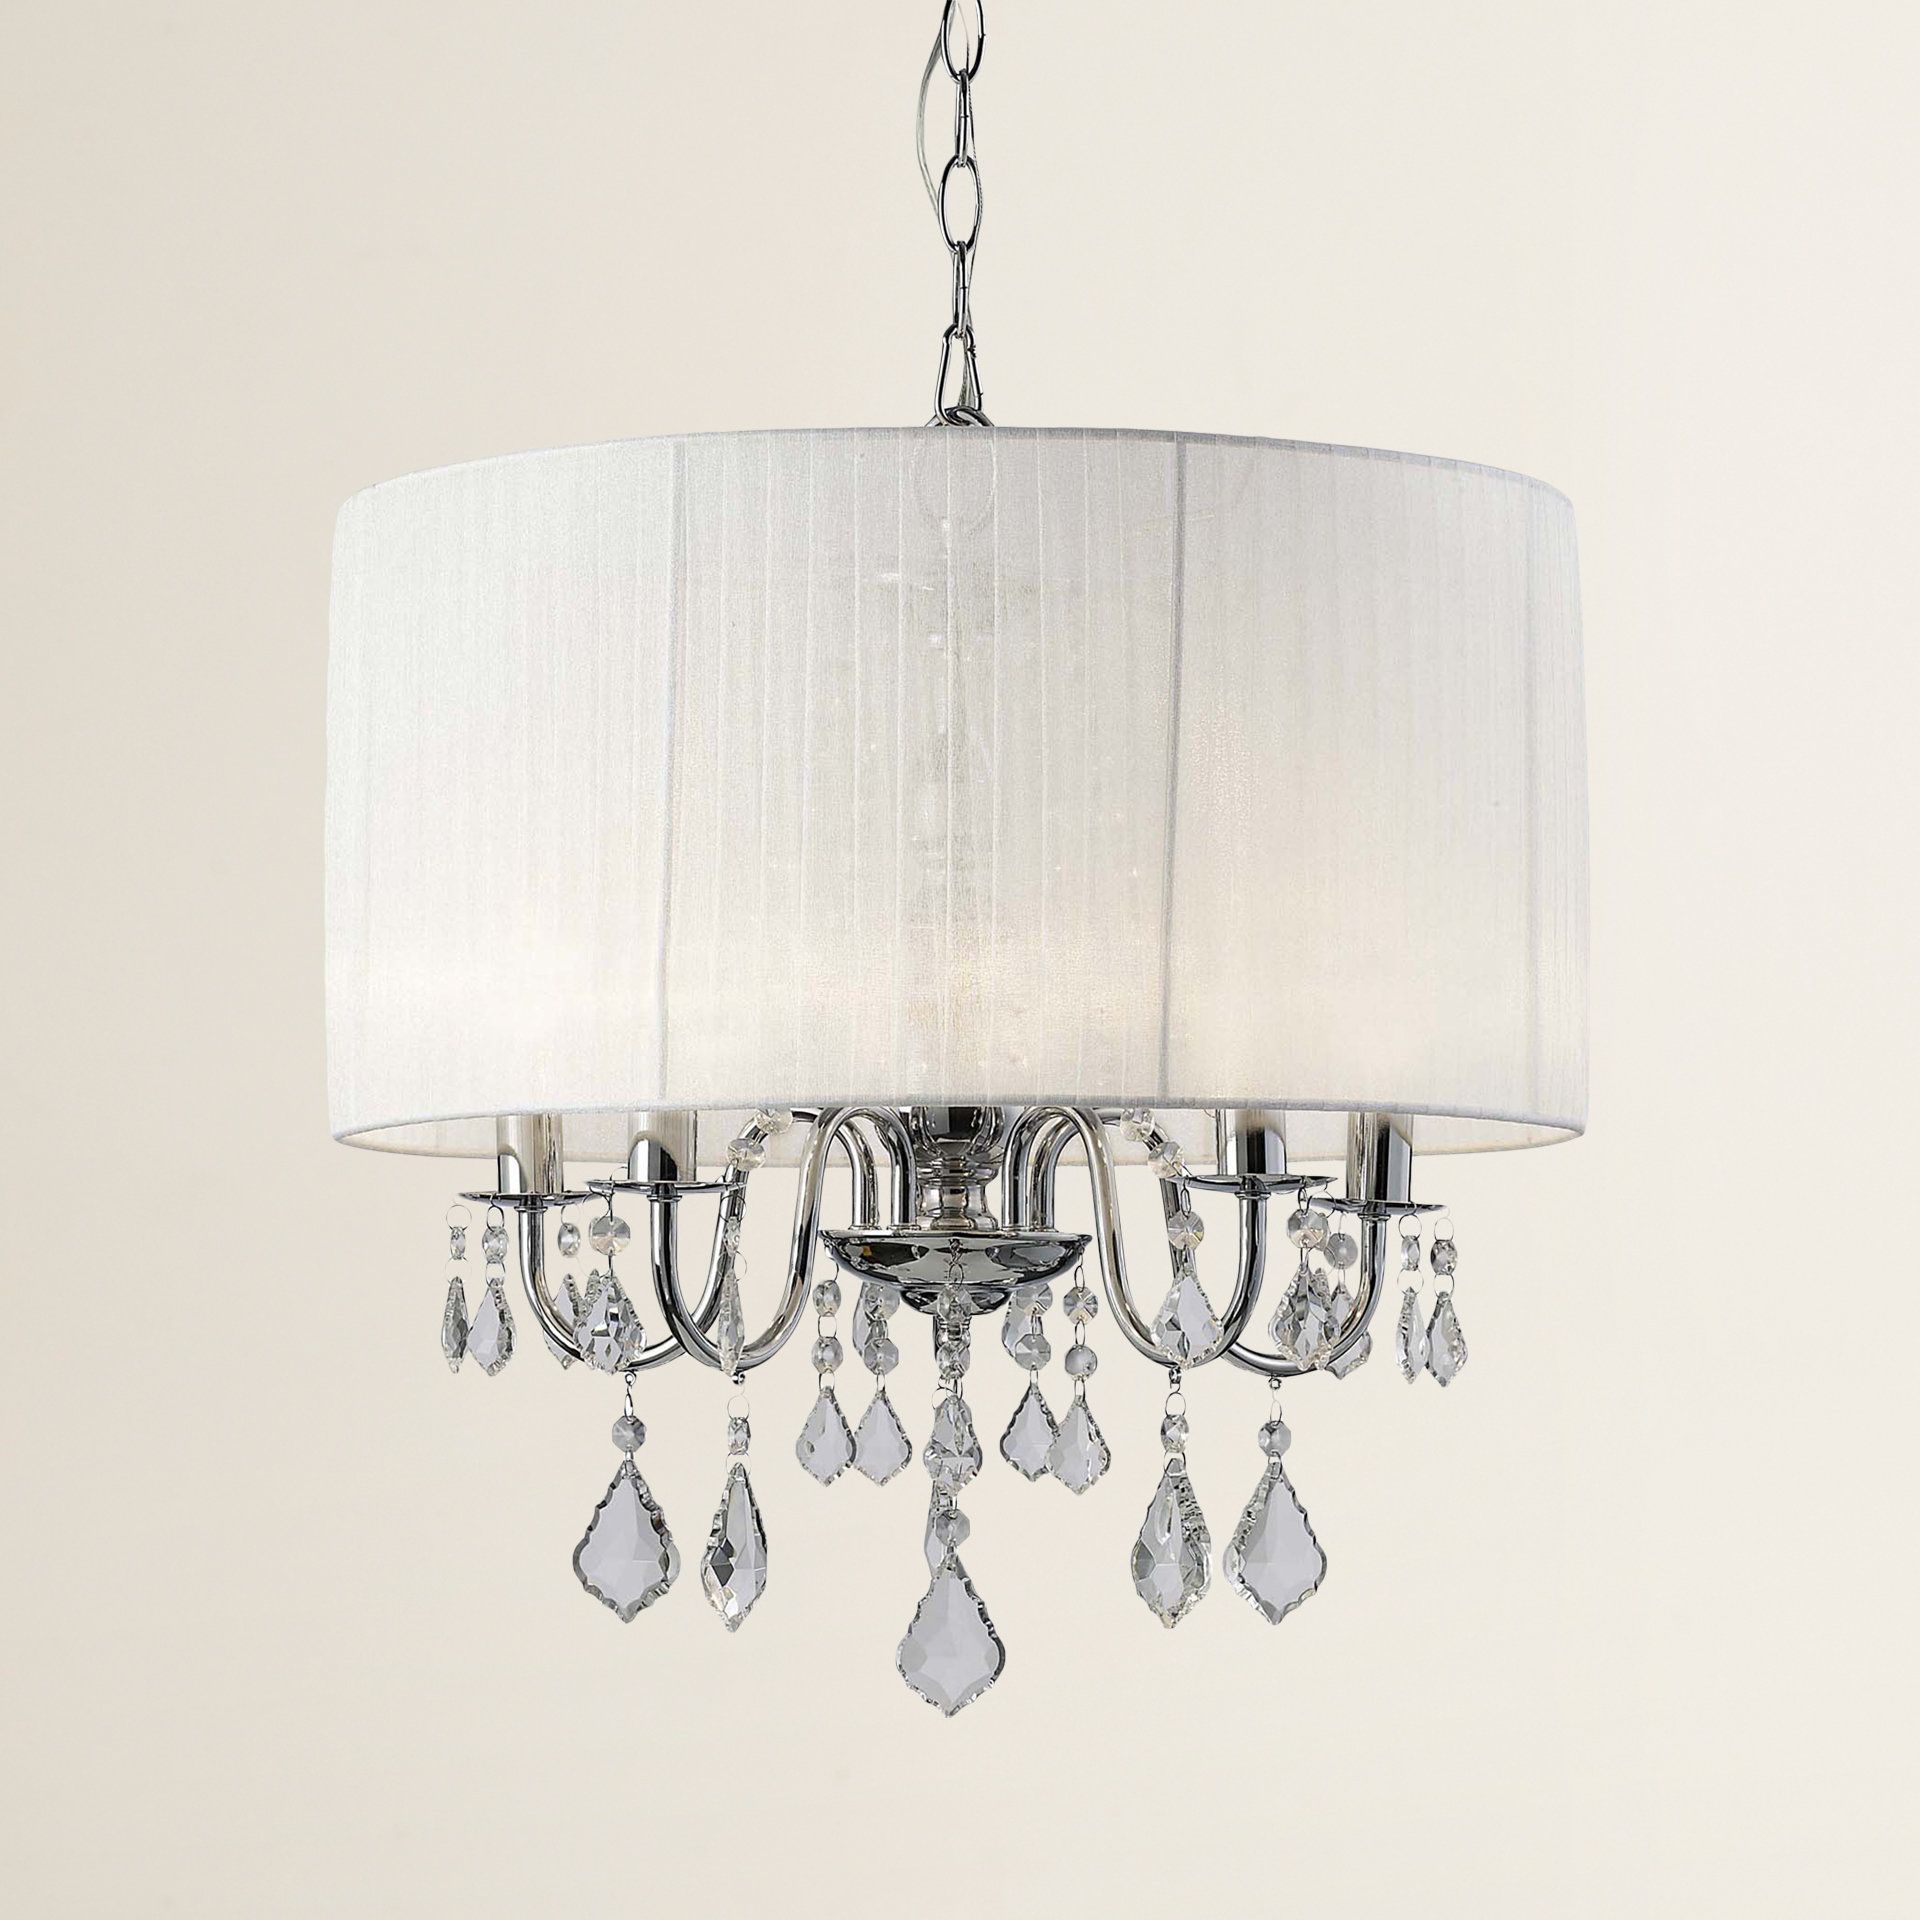 Buster 5 Light Drum Chandelier With Regard To Lindsey 4 Light Drum Chandeliers (View 5 of 30)